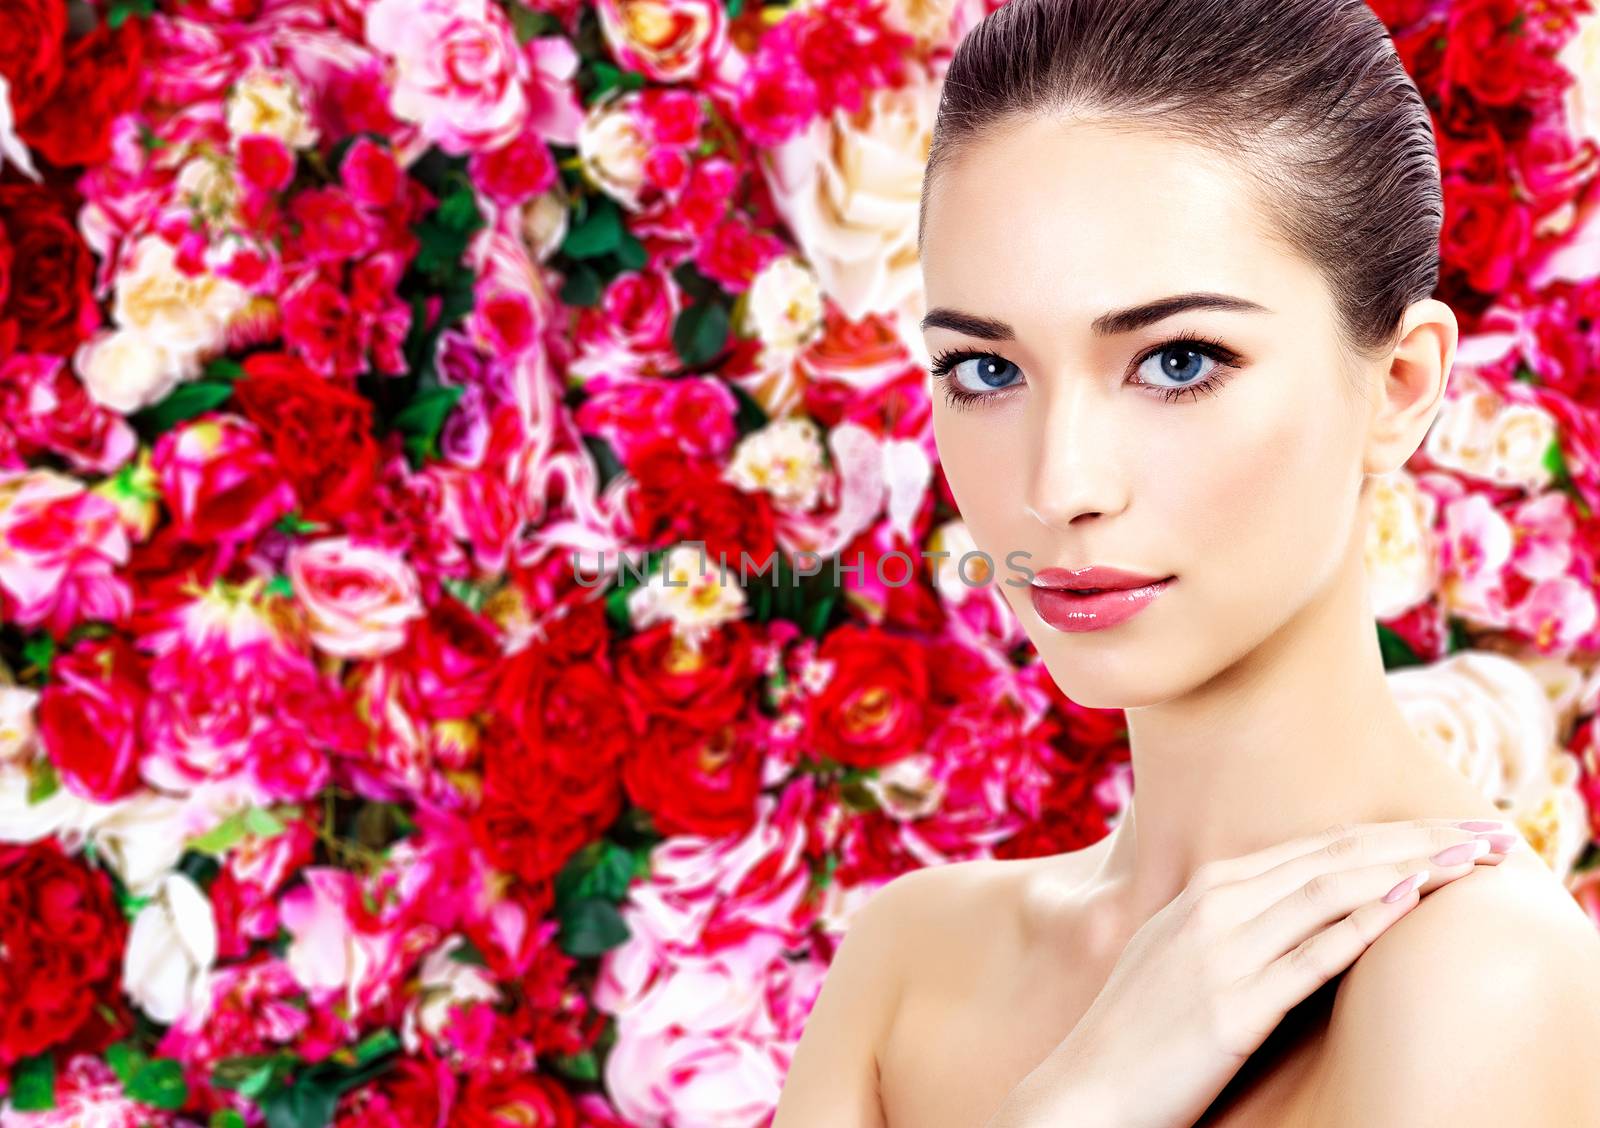 Beautiful woman on a floral background with red and white roses by Nobilior